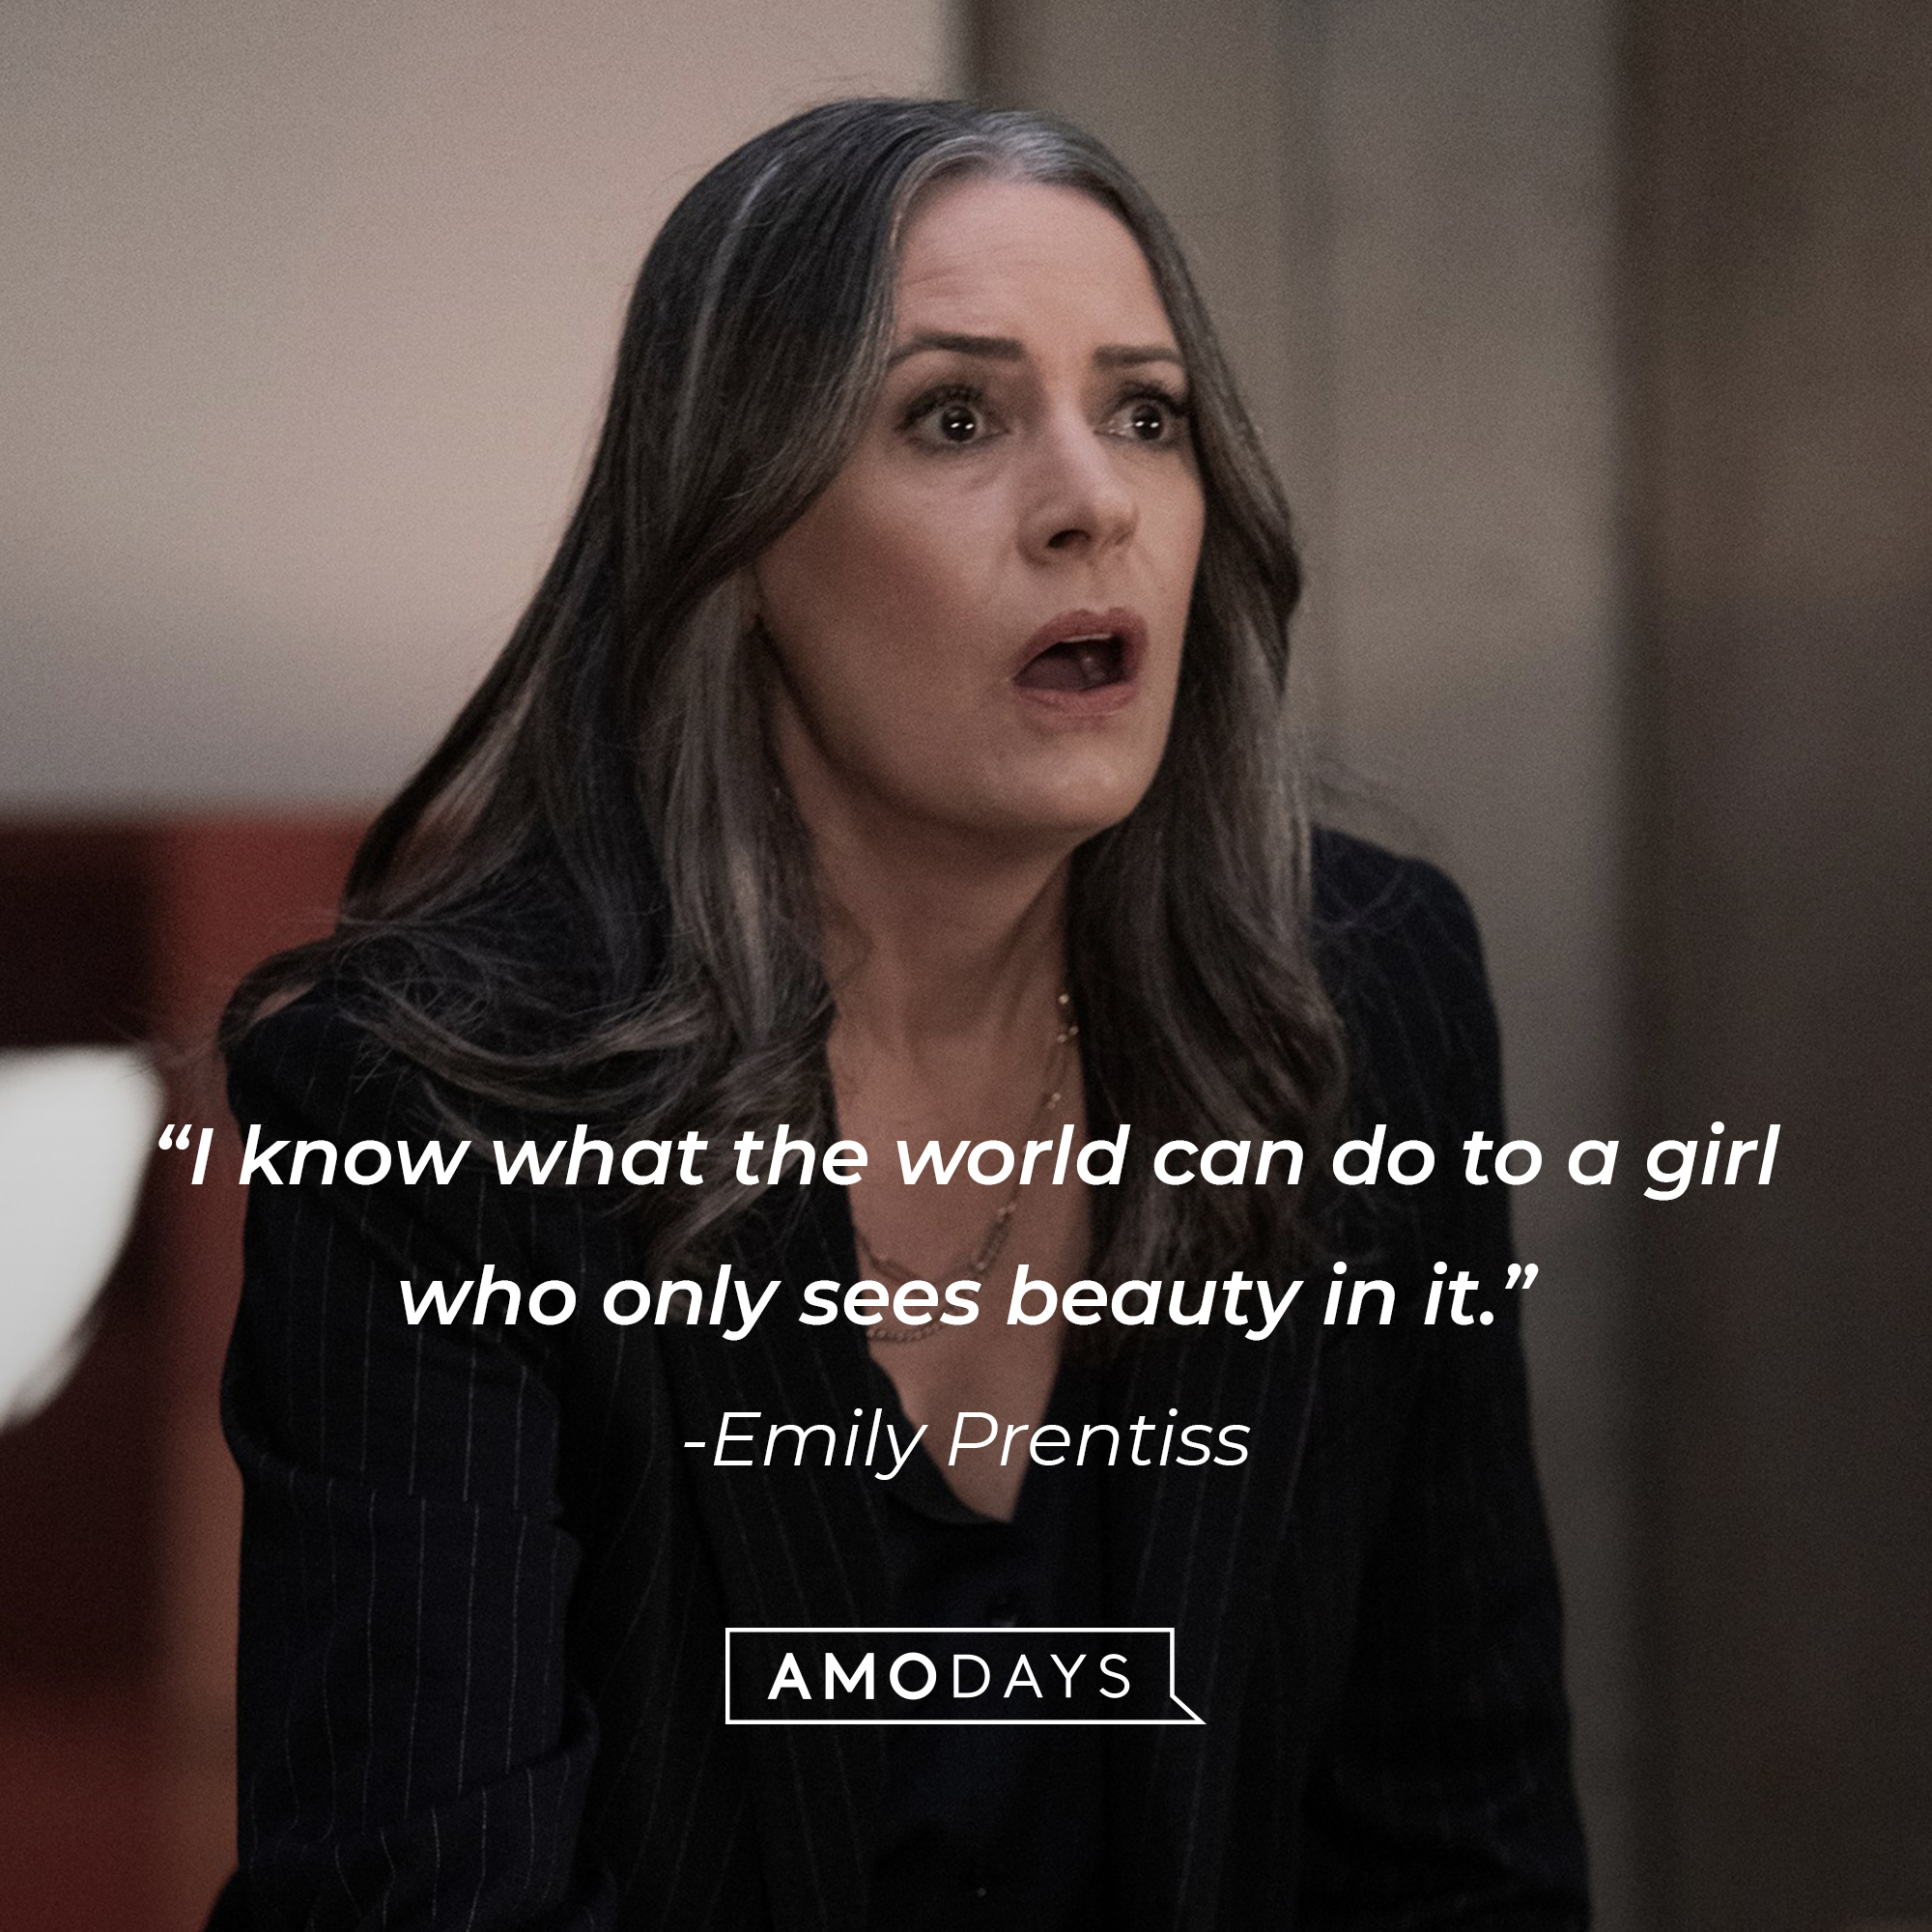 Emily Prentiss' quote: "I know what the world can do to a girl who only sees beauty in it." | Source: Facebook.com/CriminalMinds